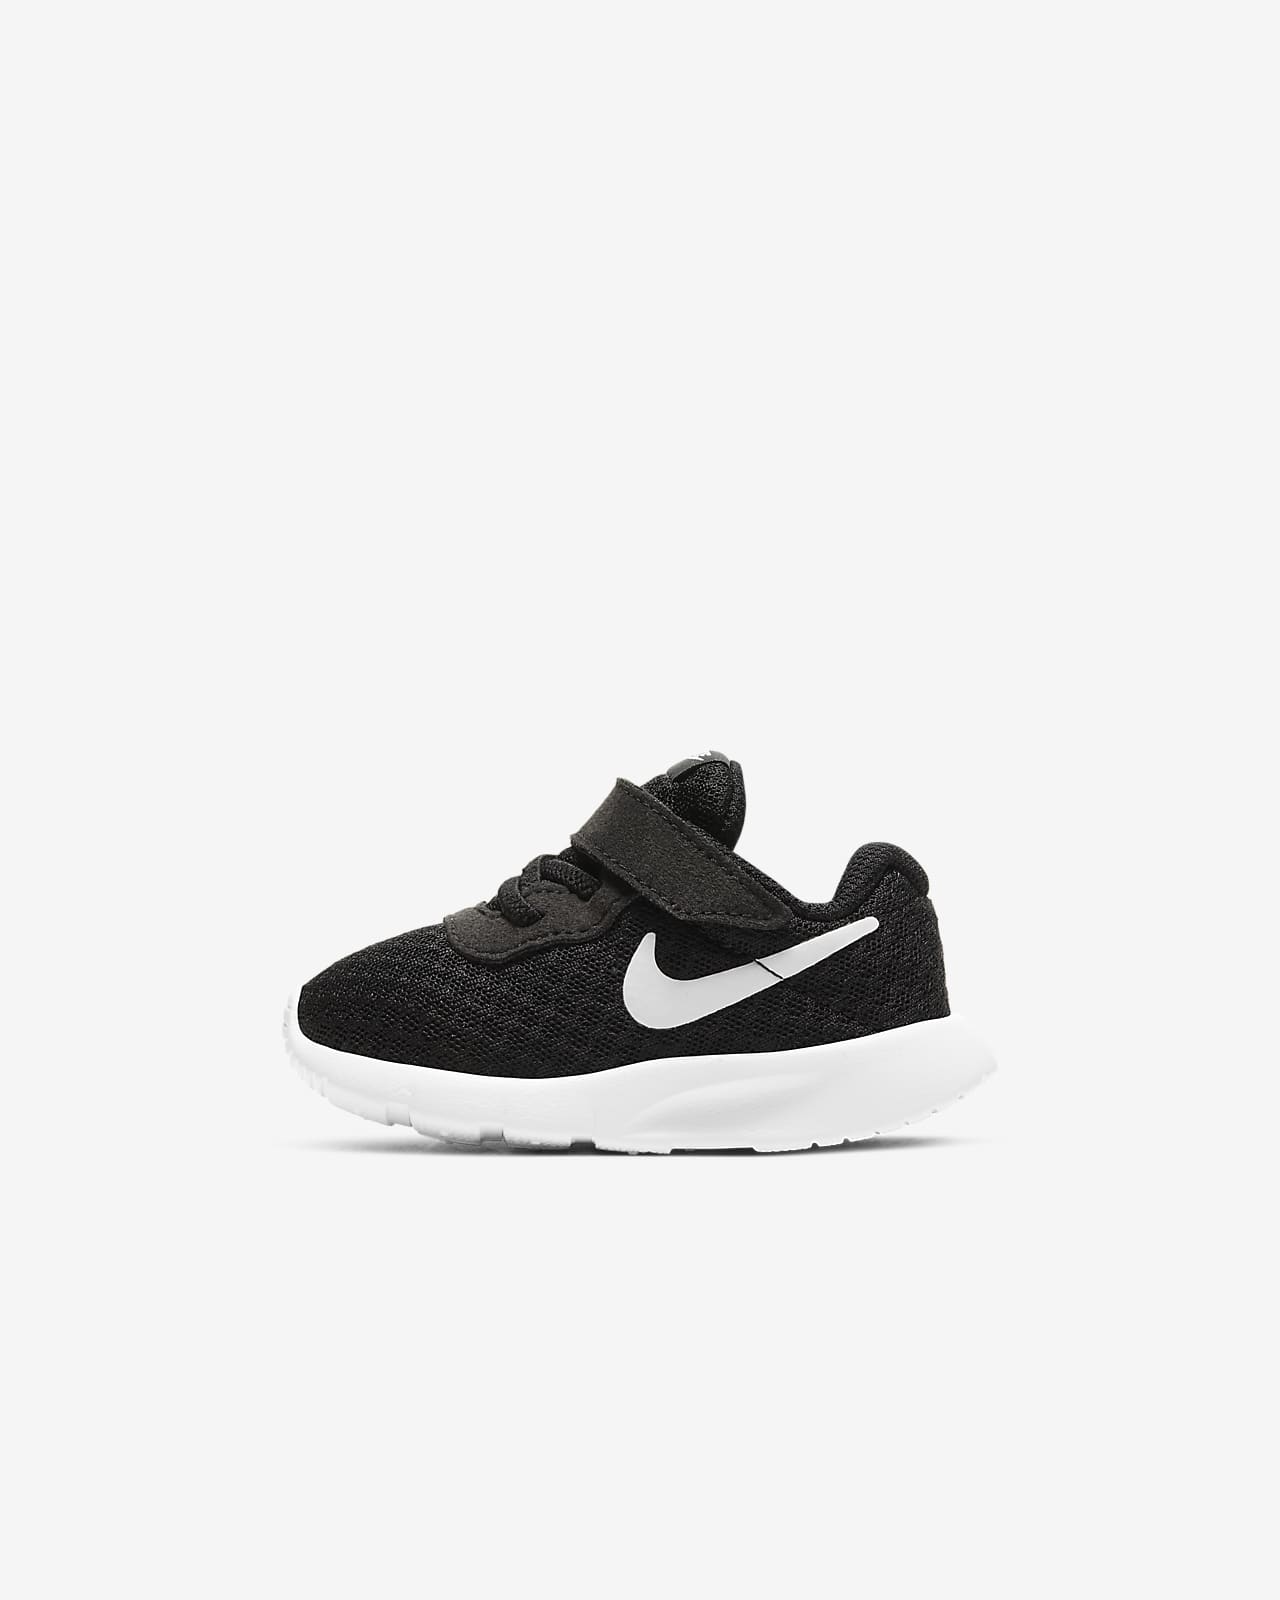 nikeid baby shoes